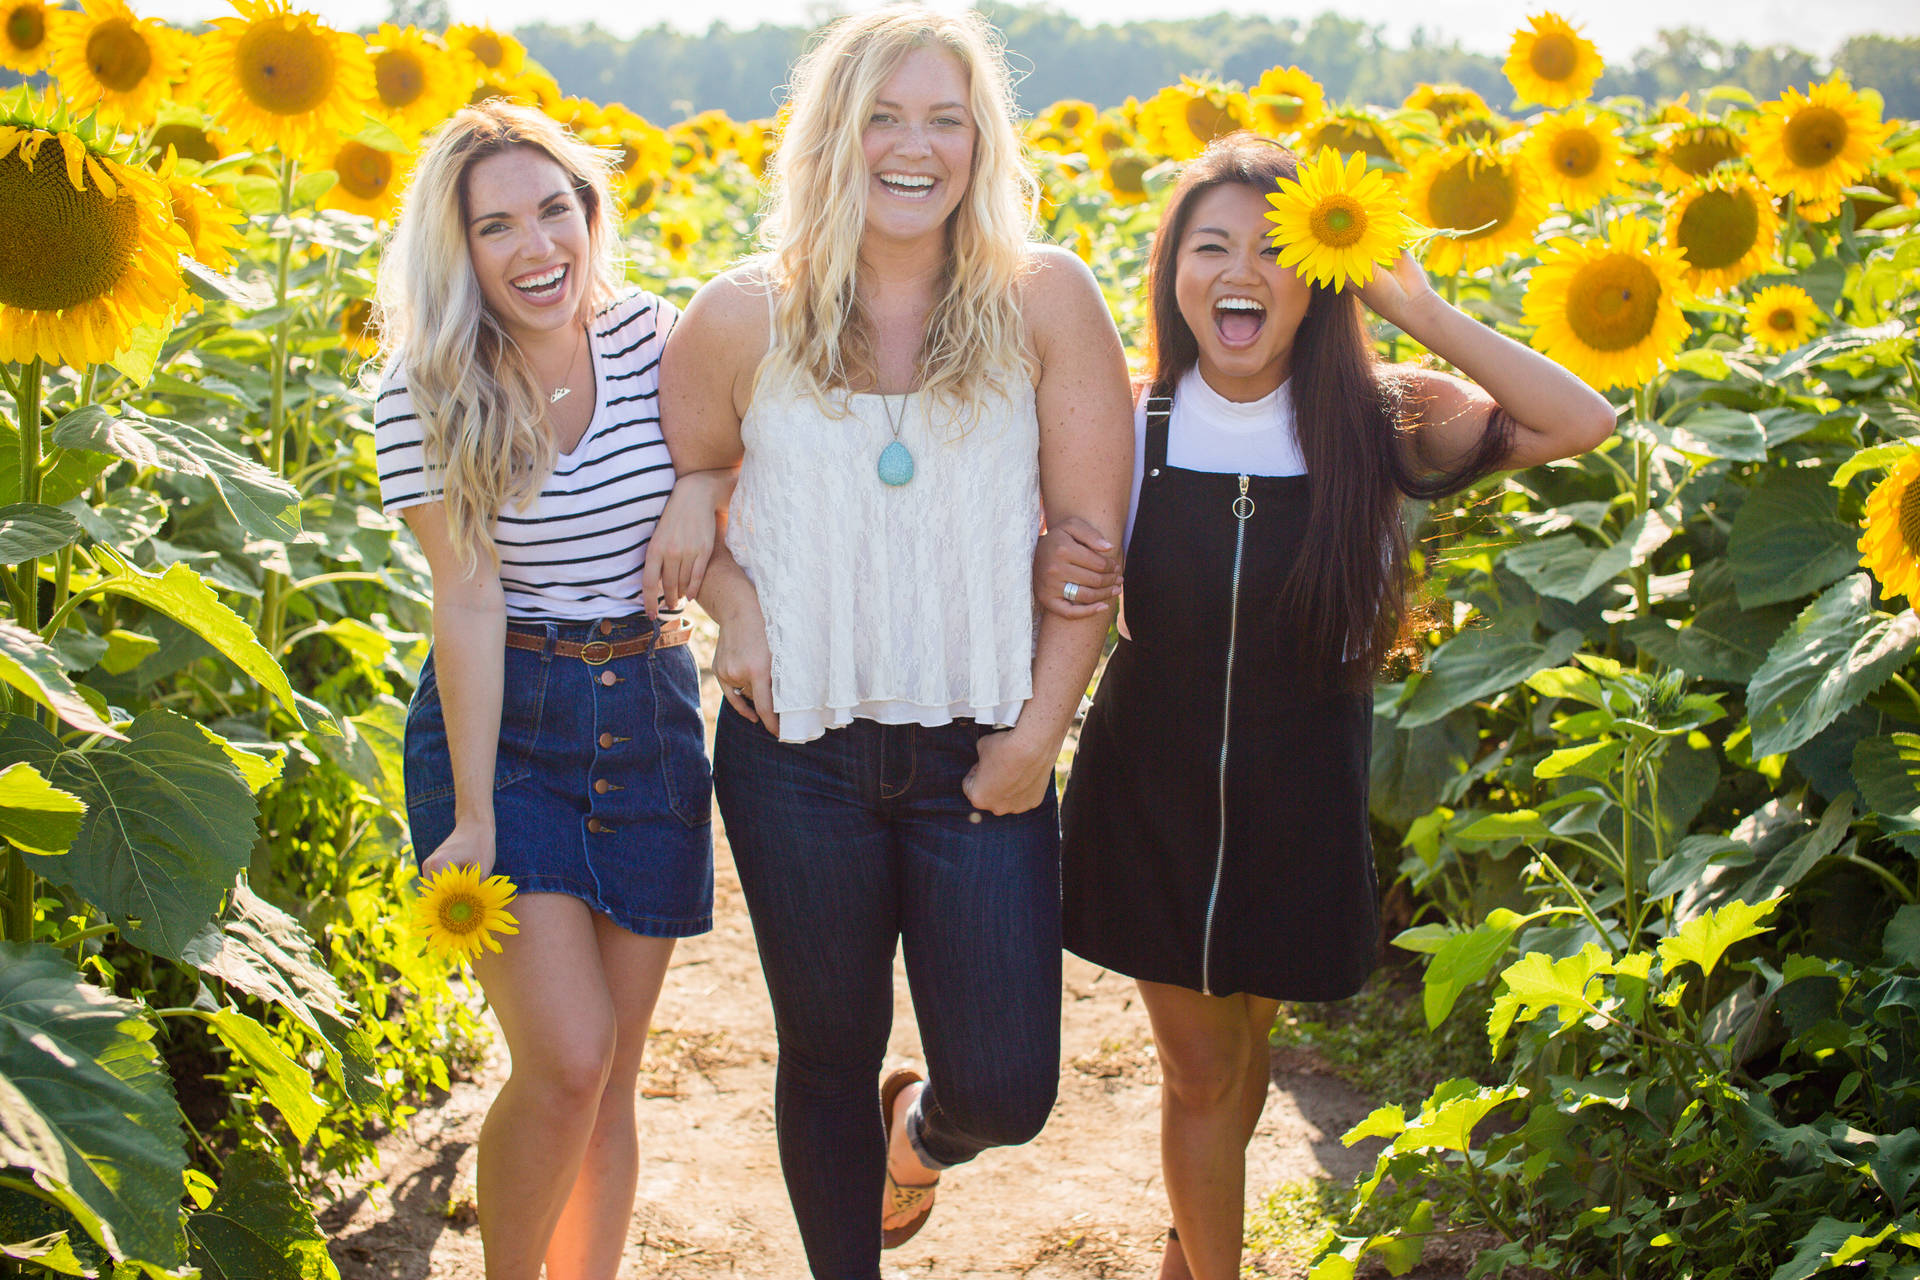 Cute Best Friends With Sunflowers